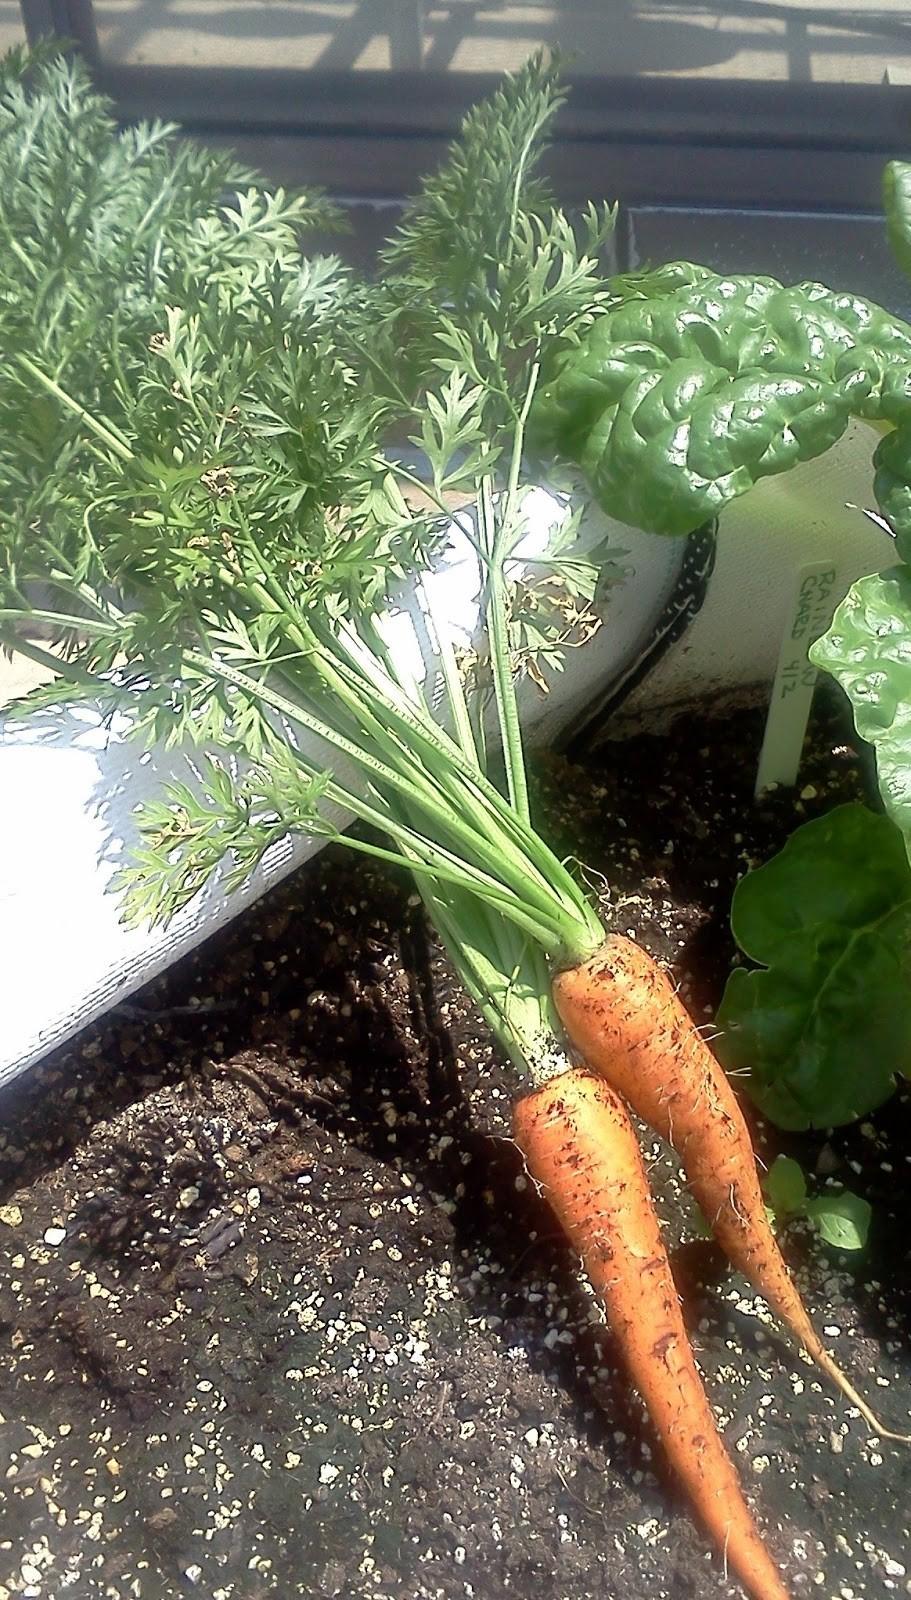 Cleaning root vegetables like these carrots is a good way to remove soil and reduce risk.